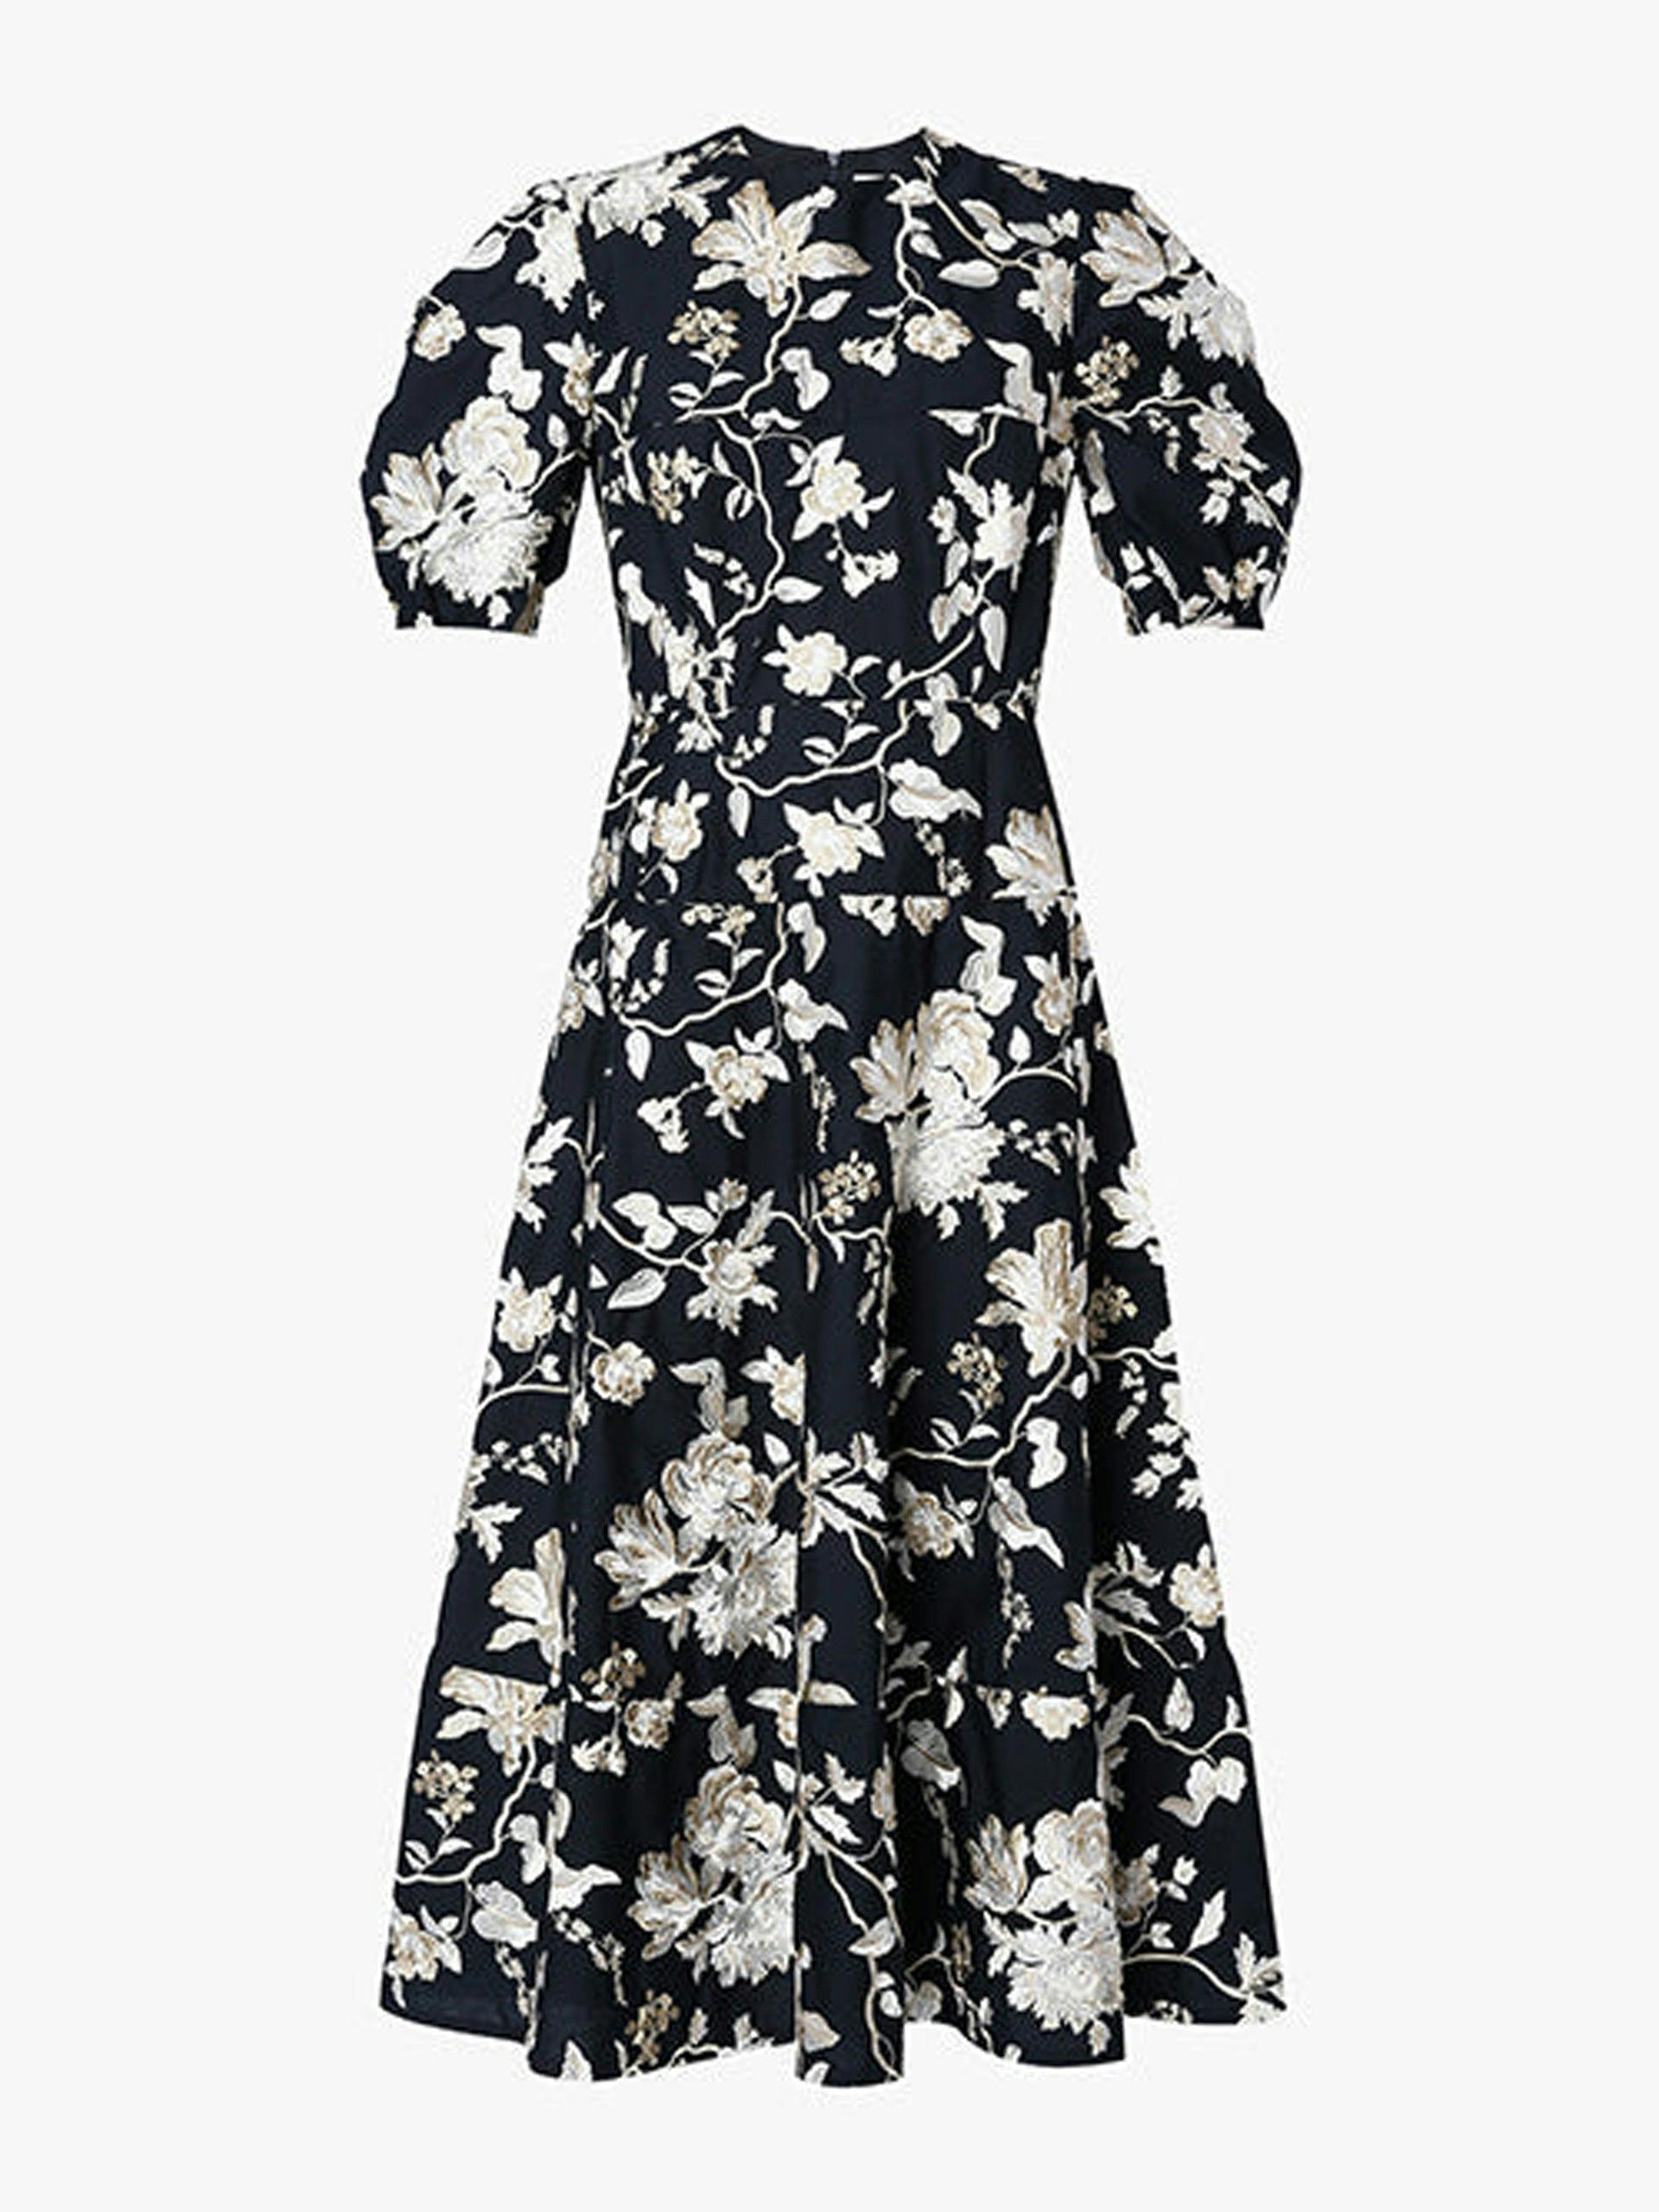 Kira embroidered black and white floral dress